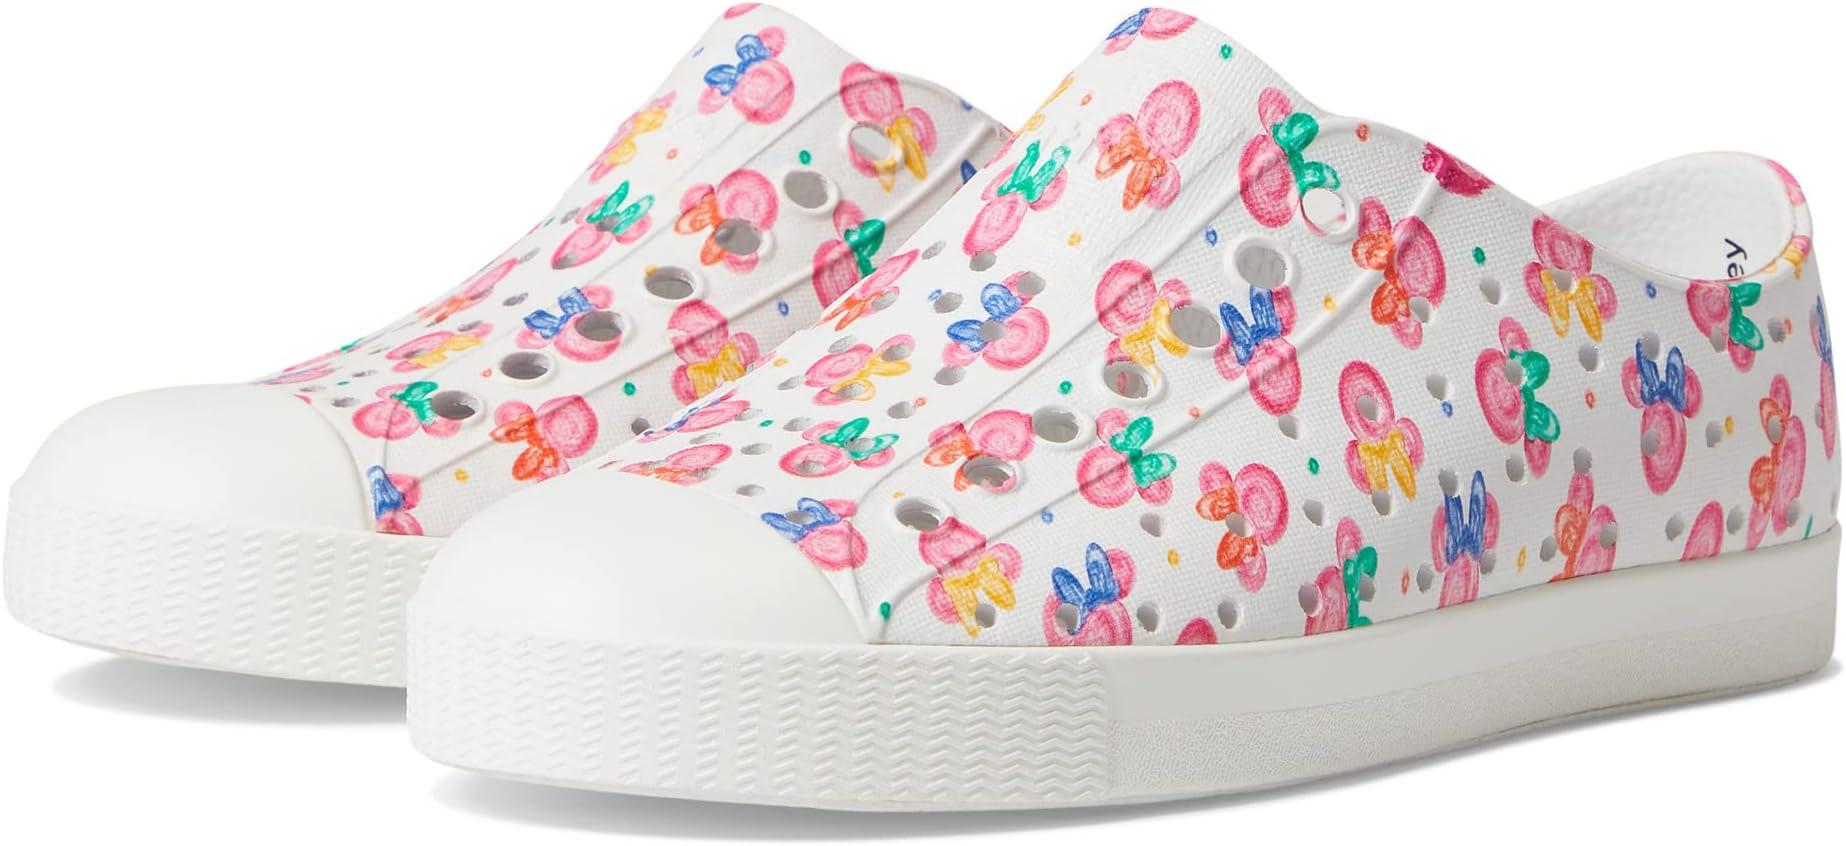 Кроссовки Jefferson Disney Print Native Shoes Kids, цвет Shell White/Shell White/Minnie Paint Drops All Over Print dirty dirty shoes net red ins super fire casual shoes 2021 all match leather star shoes white shoes super star women